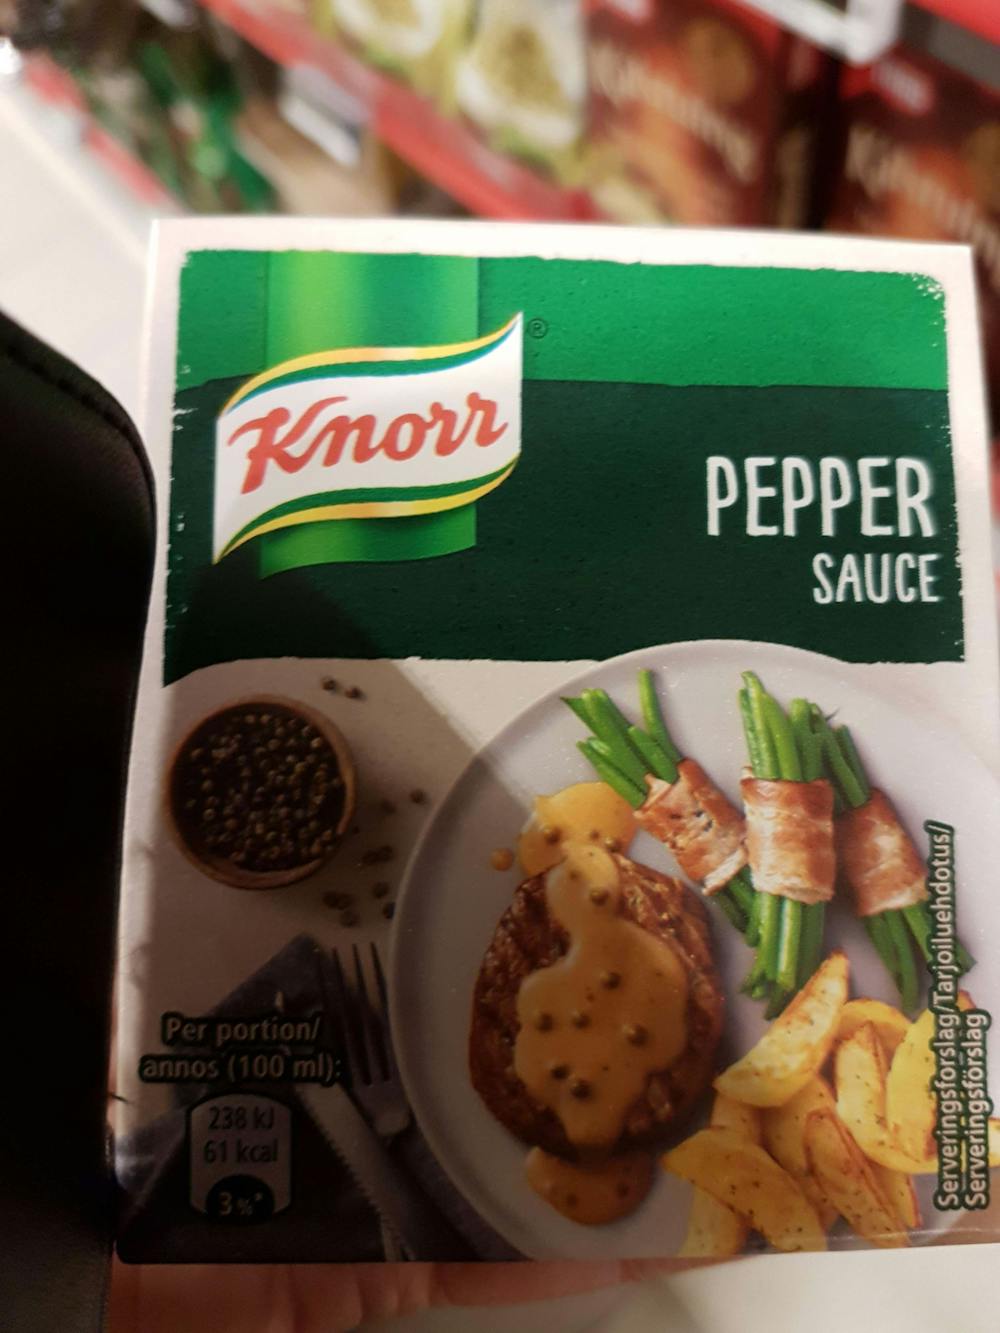 Pepper sauce, Knorr